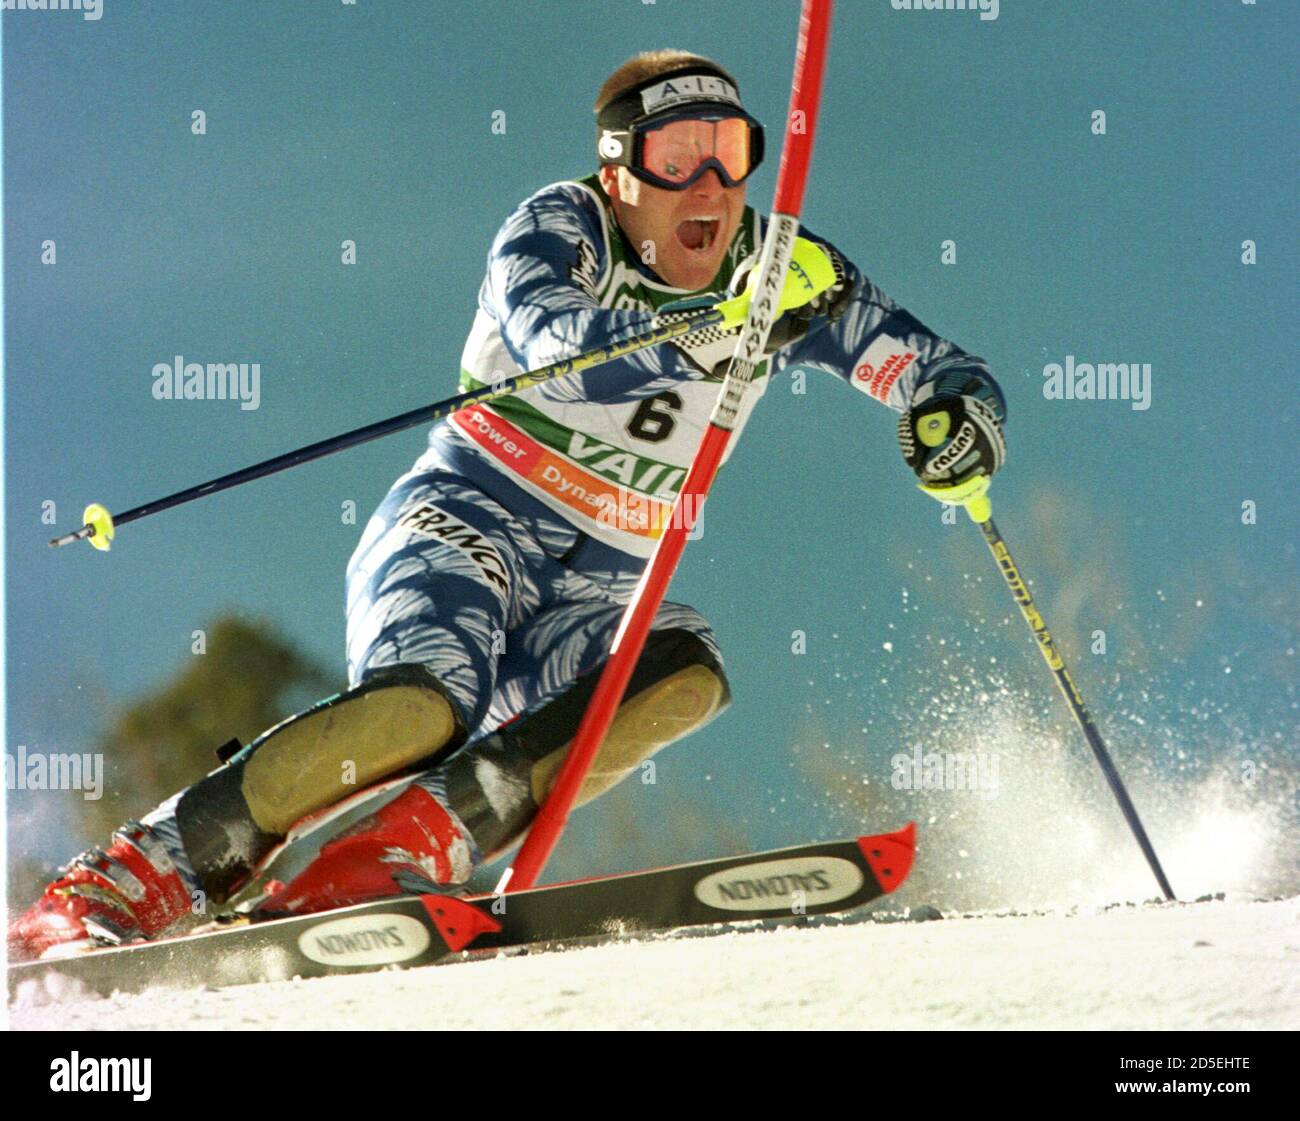 skier Sebastien Amiez knocks down a gate while on his way to posting the 11th fastest time during the first run on the men's slalom course at the World Alpine Skiing